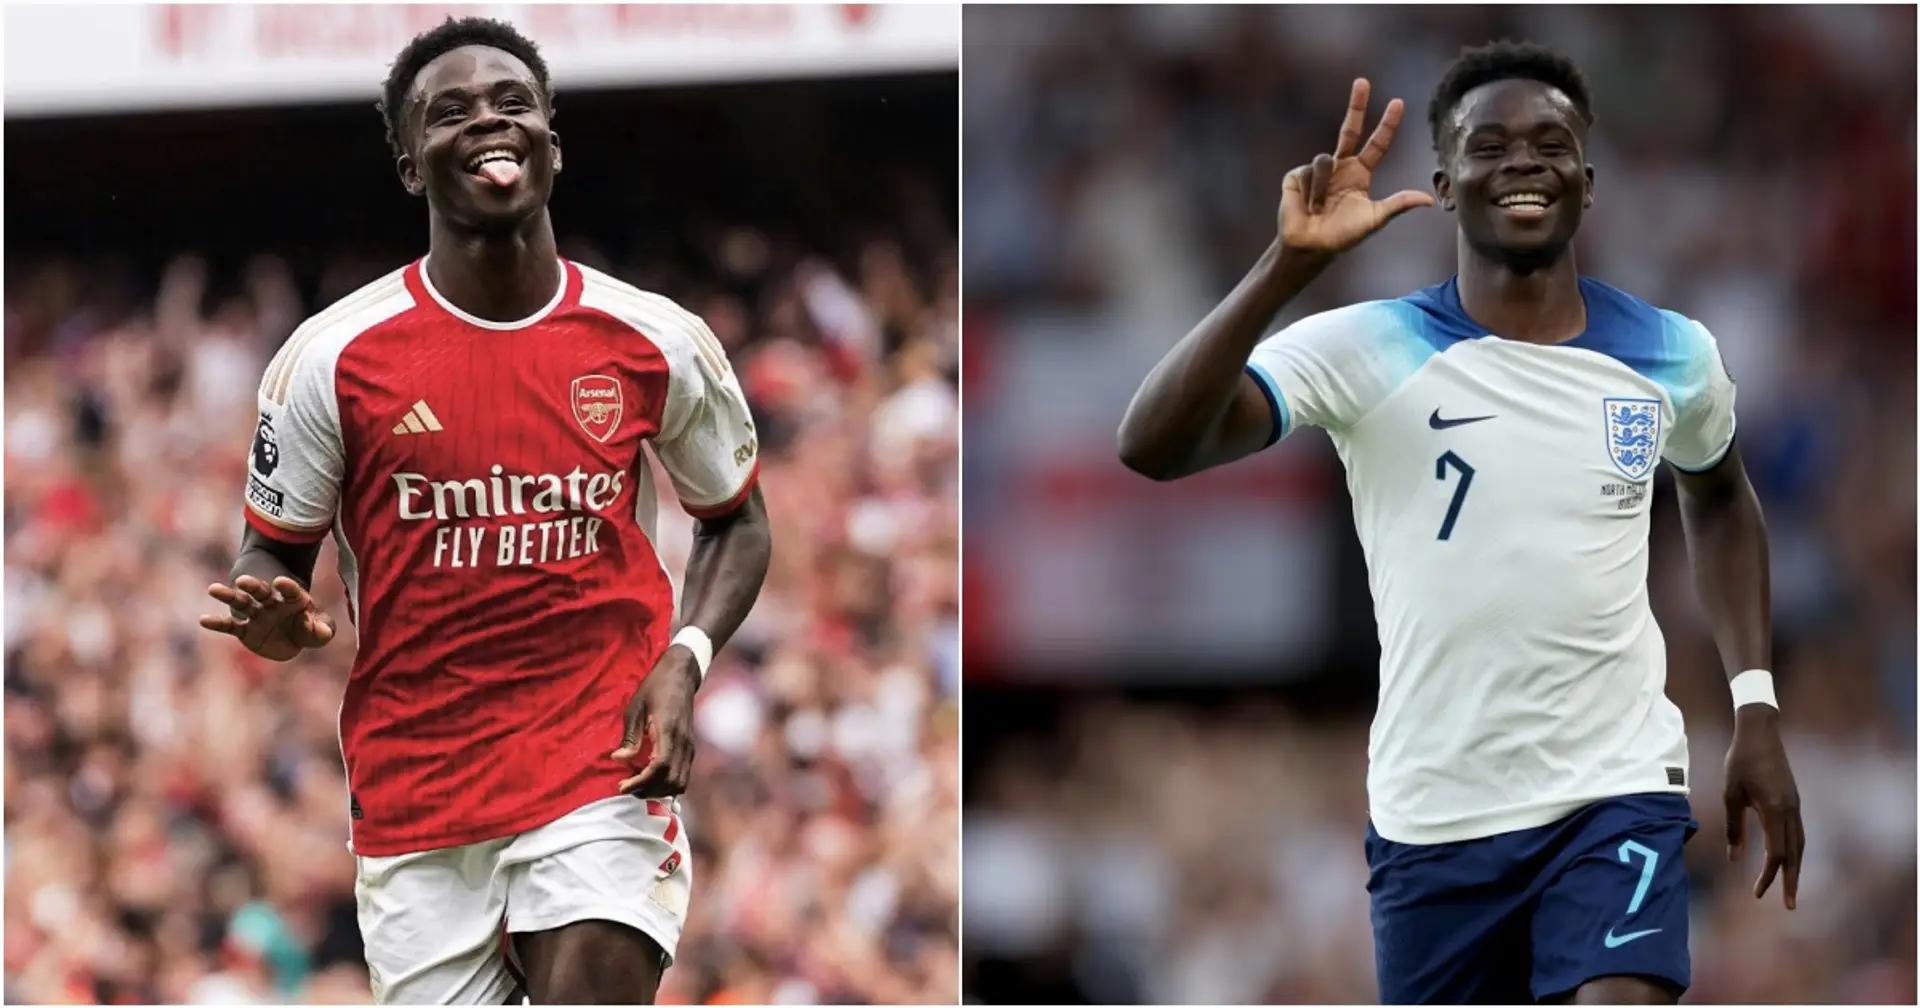 How likely is Bukayo Saka to become England's best goalscorer at 2024 Euro? Answered